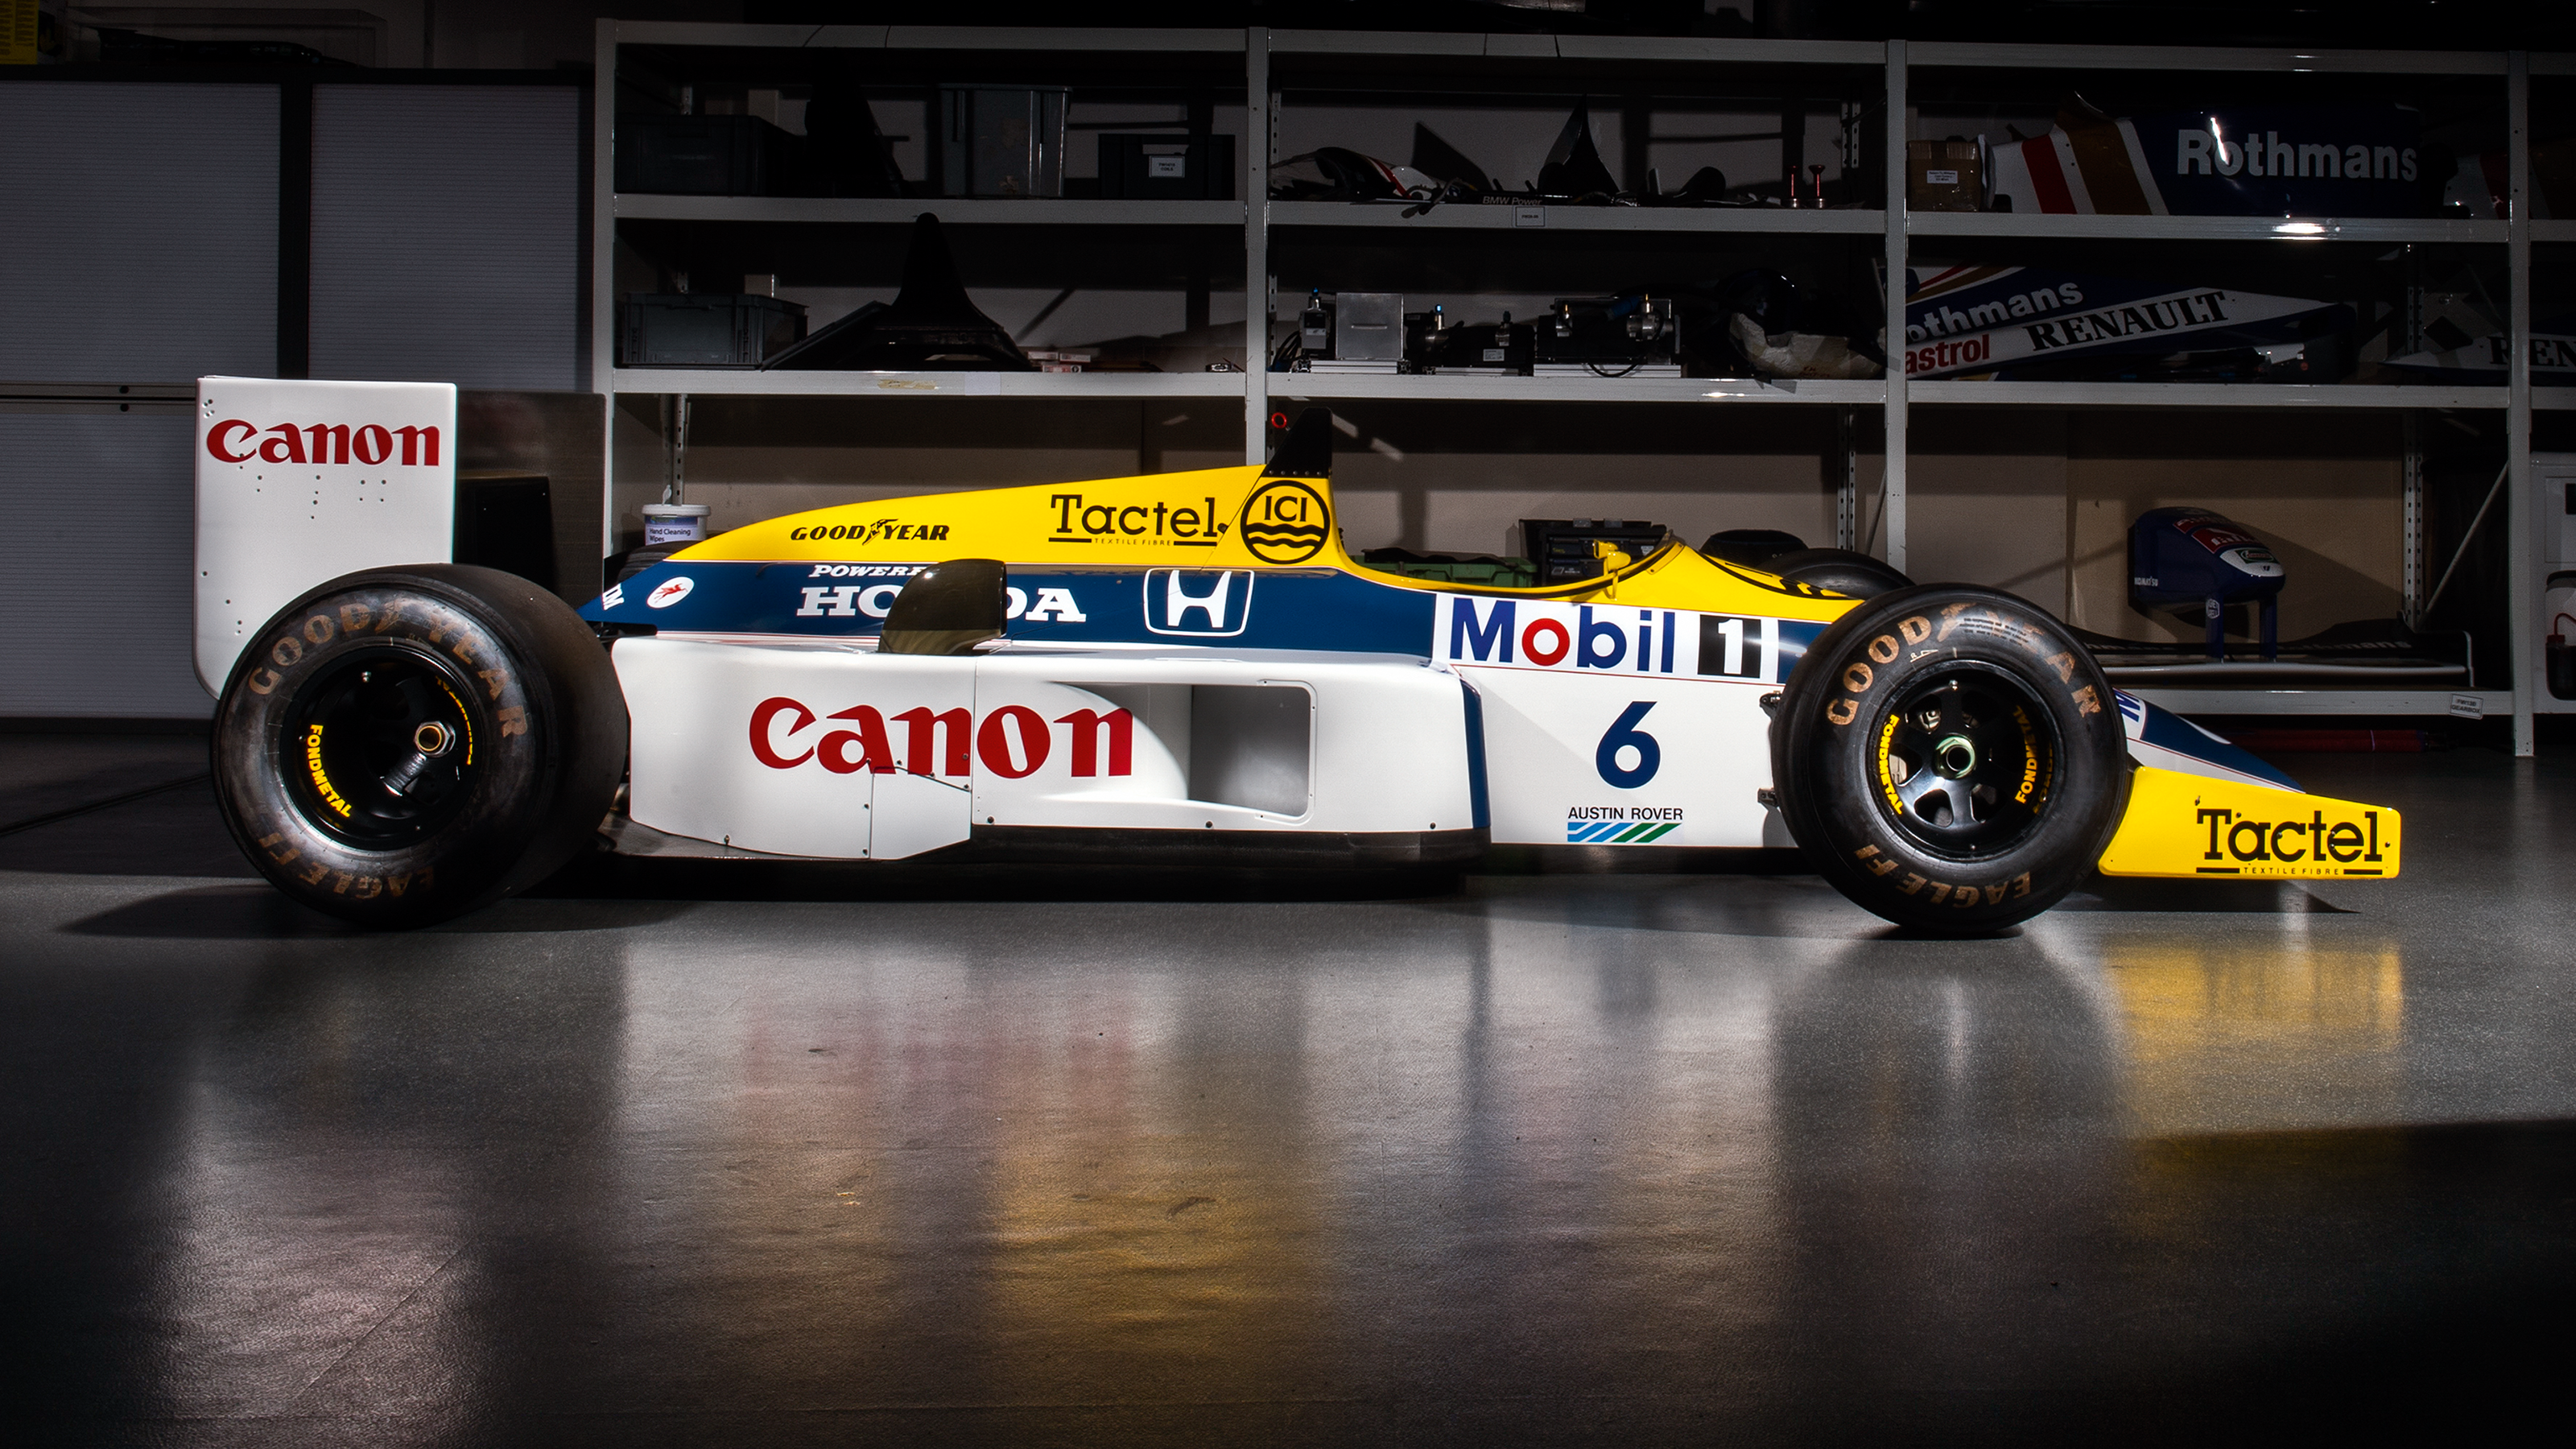 First drive: what's Renault's 550bhp R.S. 01 racer like to drive